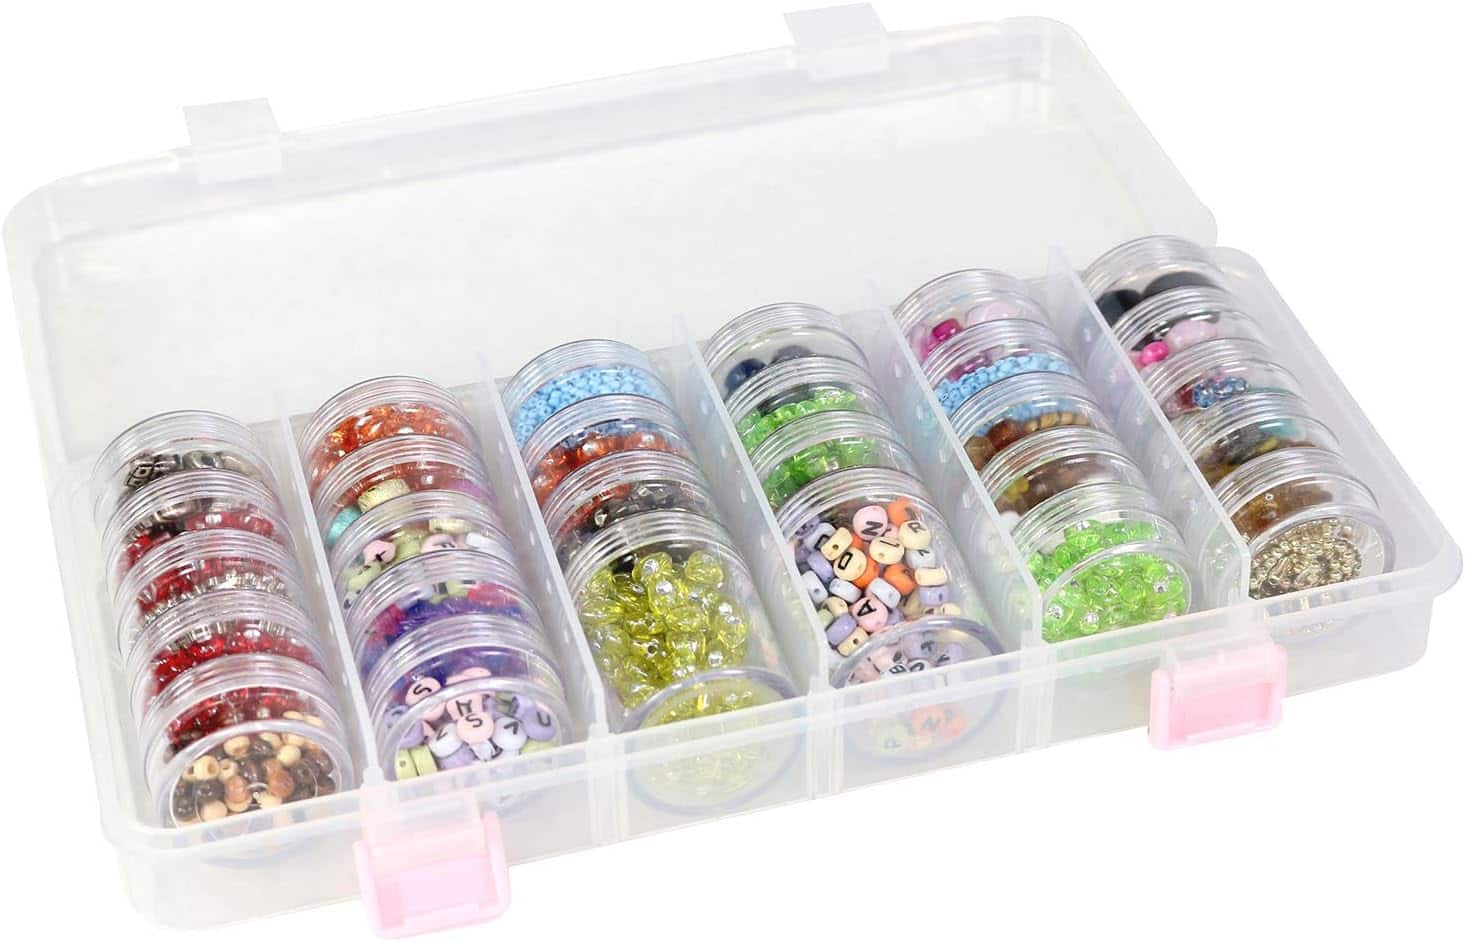 Mathtoxyz 36PCS Bead Organizer Box, Small Bead Organizers and Storage  Containers Rectangle Bead Holder Plastic Cases for Clay Beads Bracelet  Making